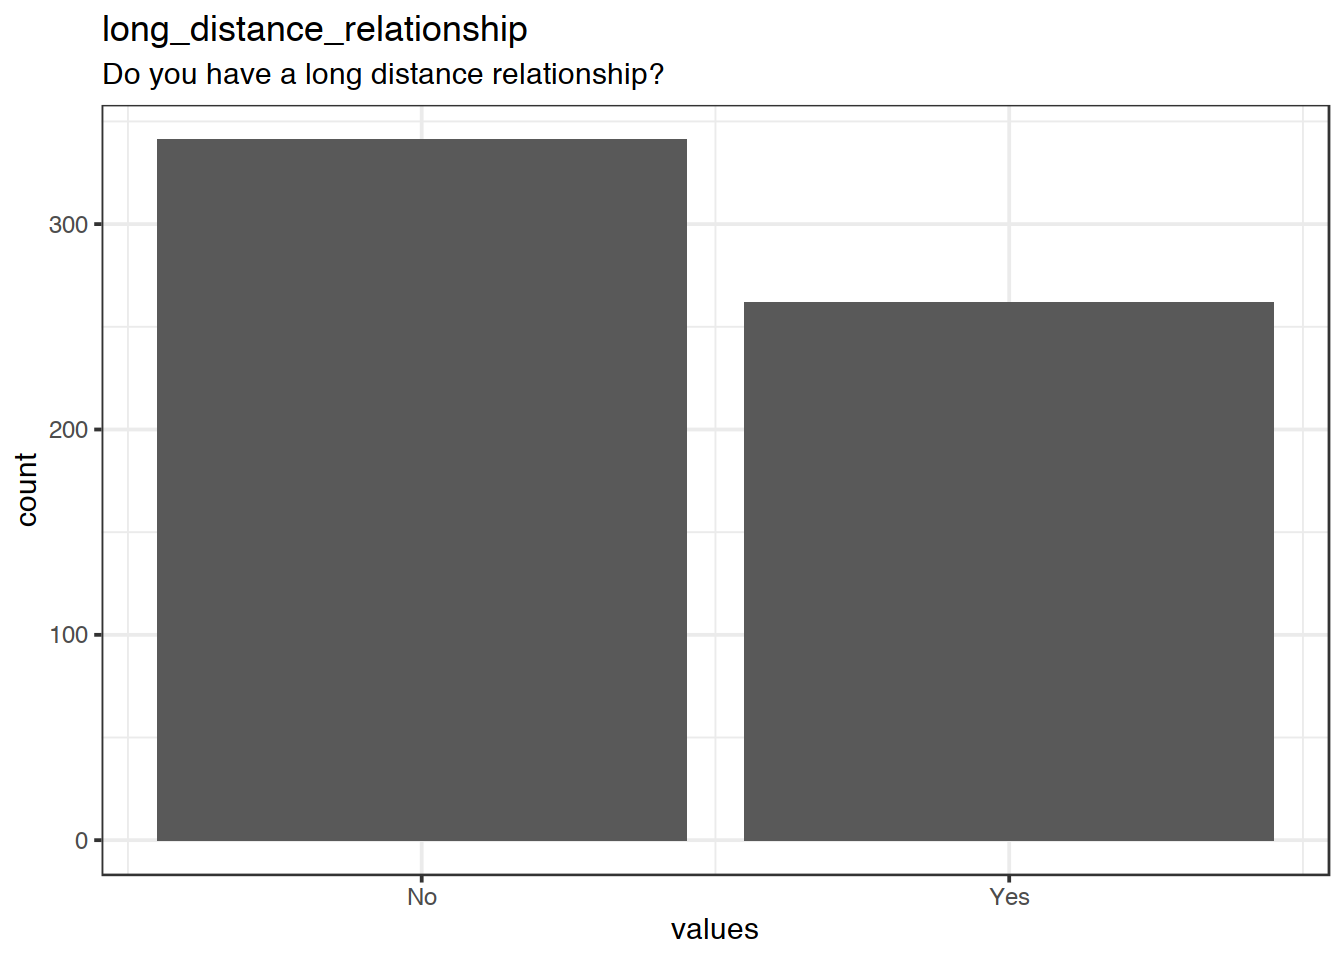 Distribution of values for long_distance_relationship